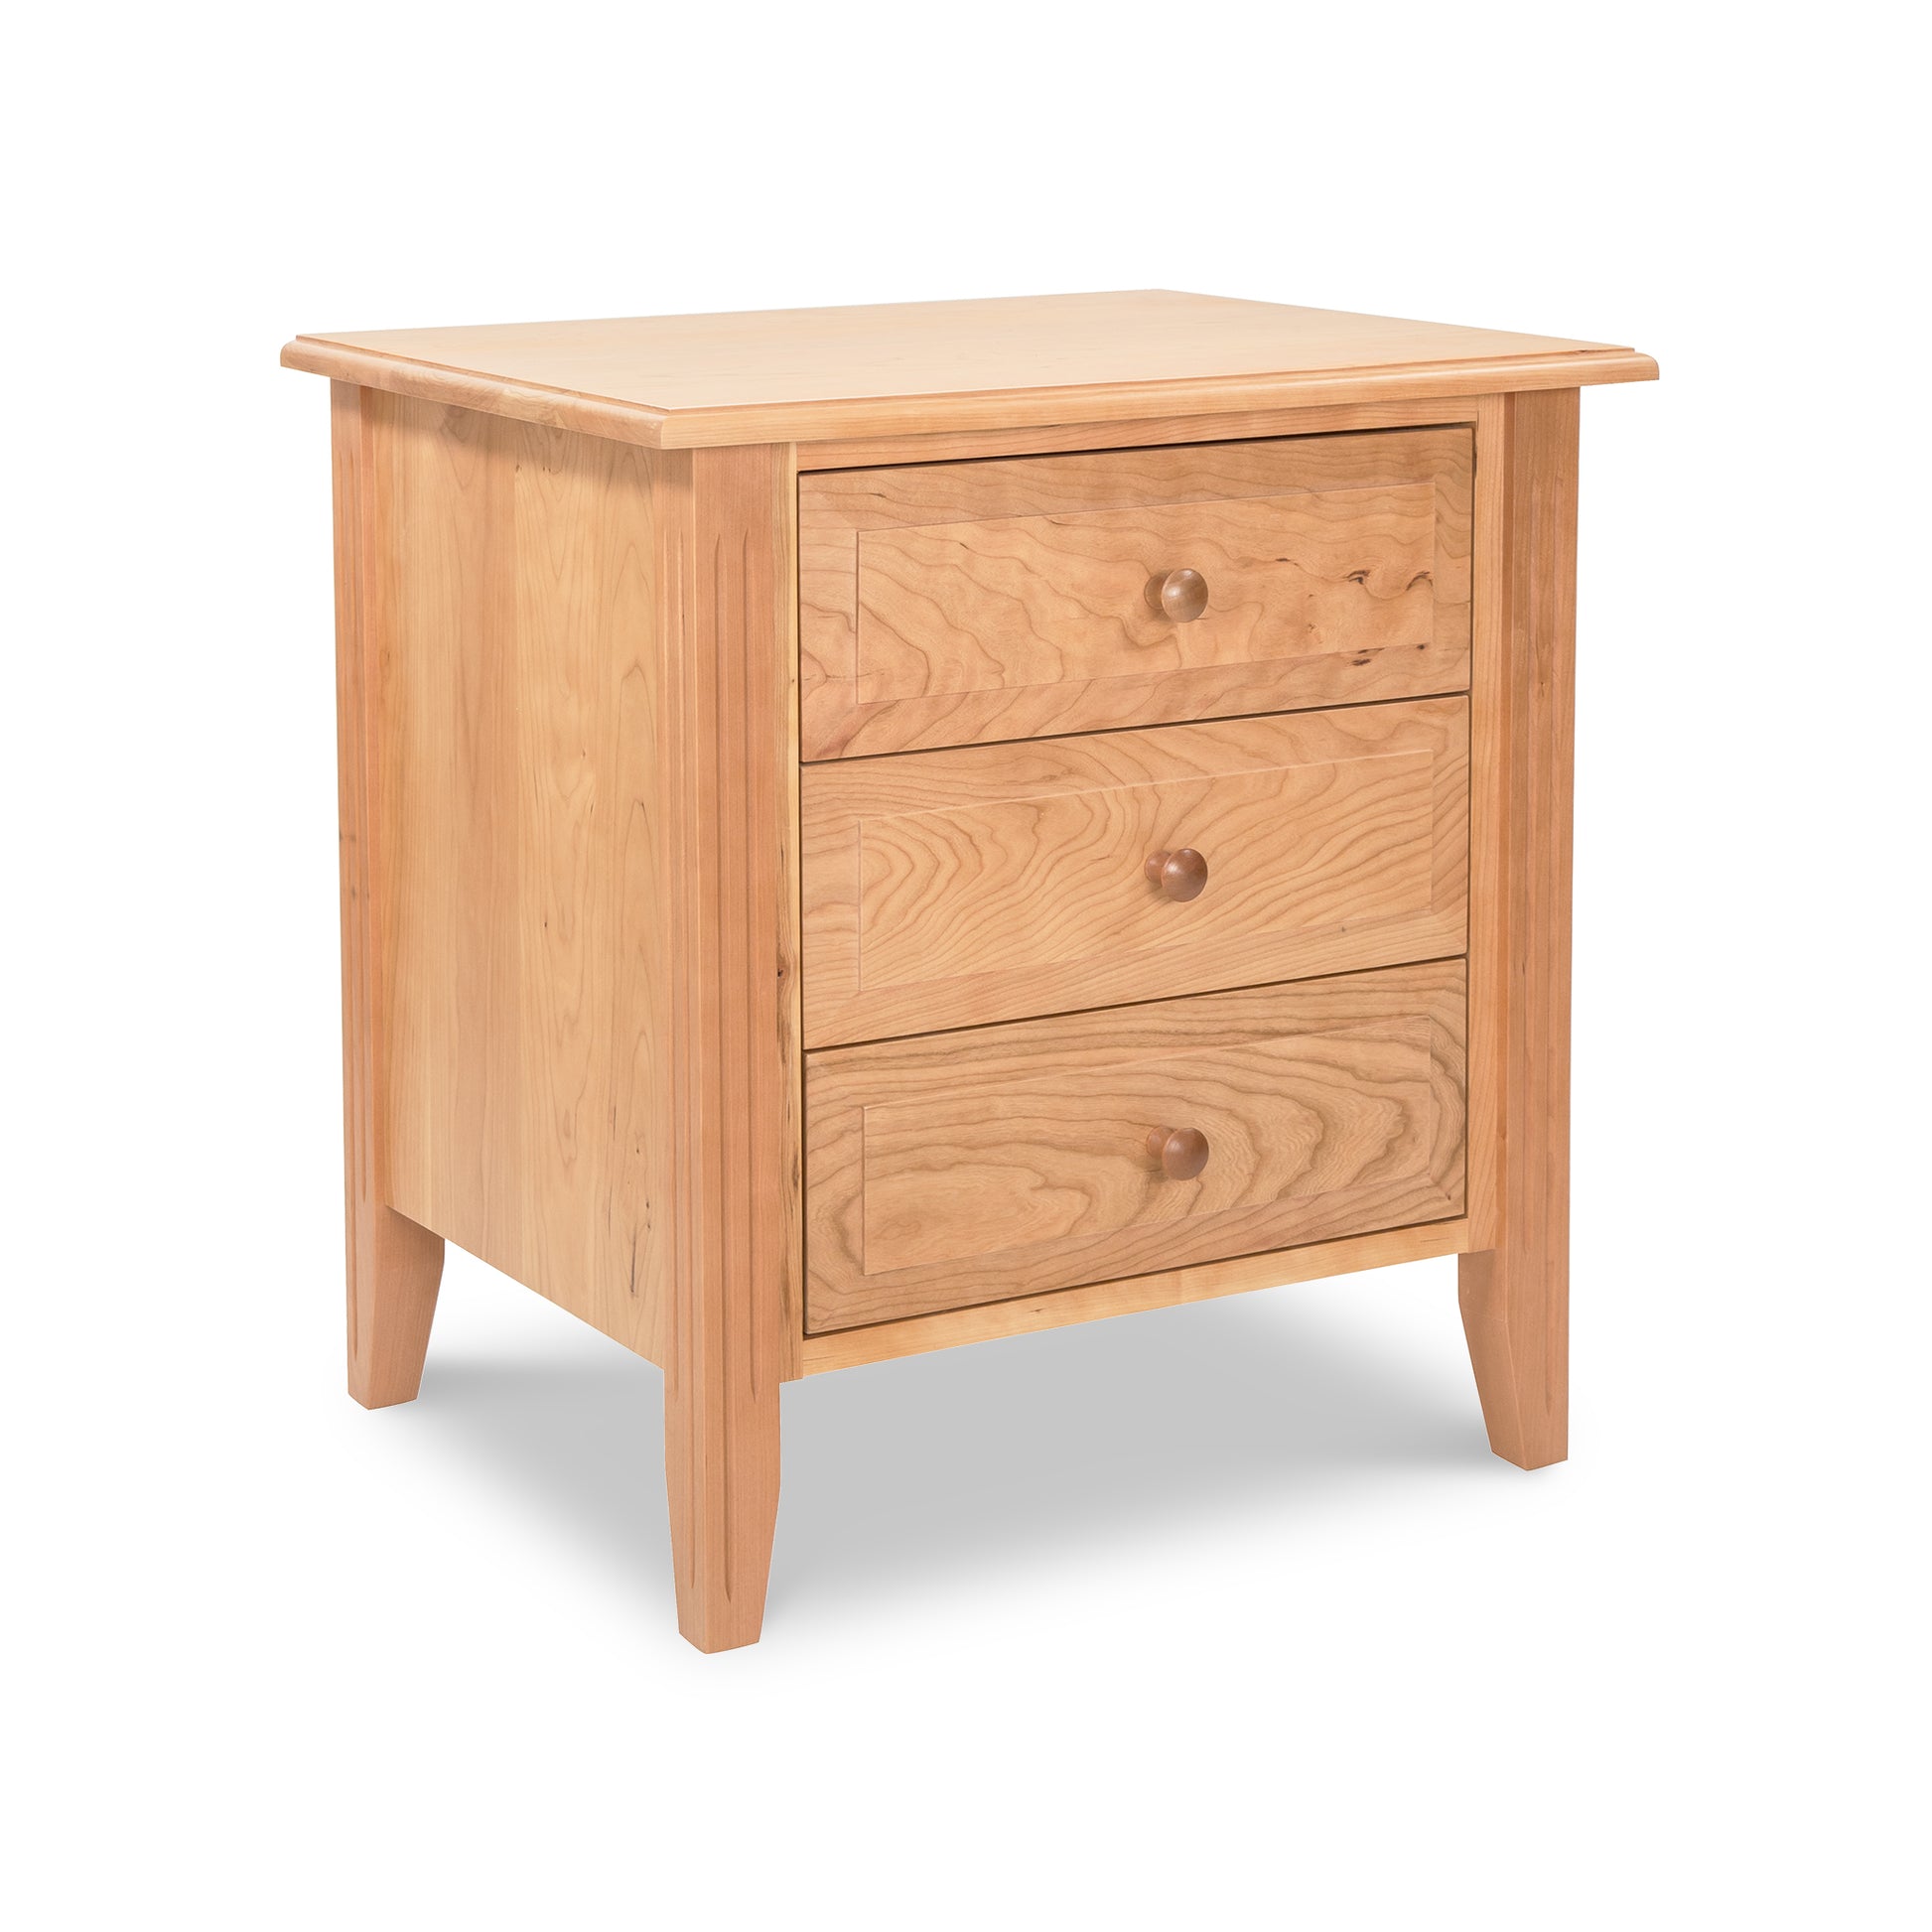 A Renfrew Shaker 3-Drawer Nightstand by Lyndon Furniture, featuring fluted legs.